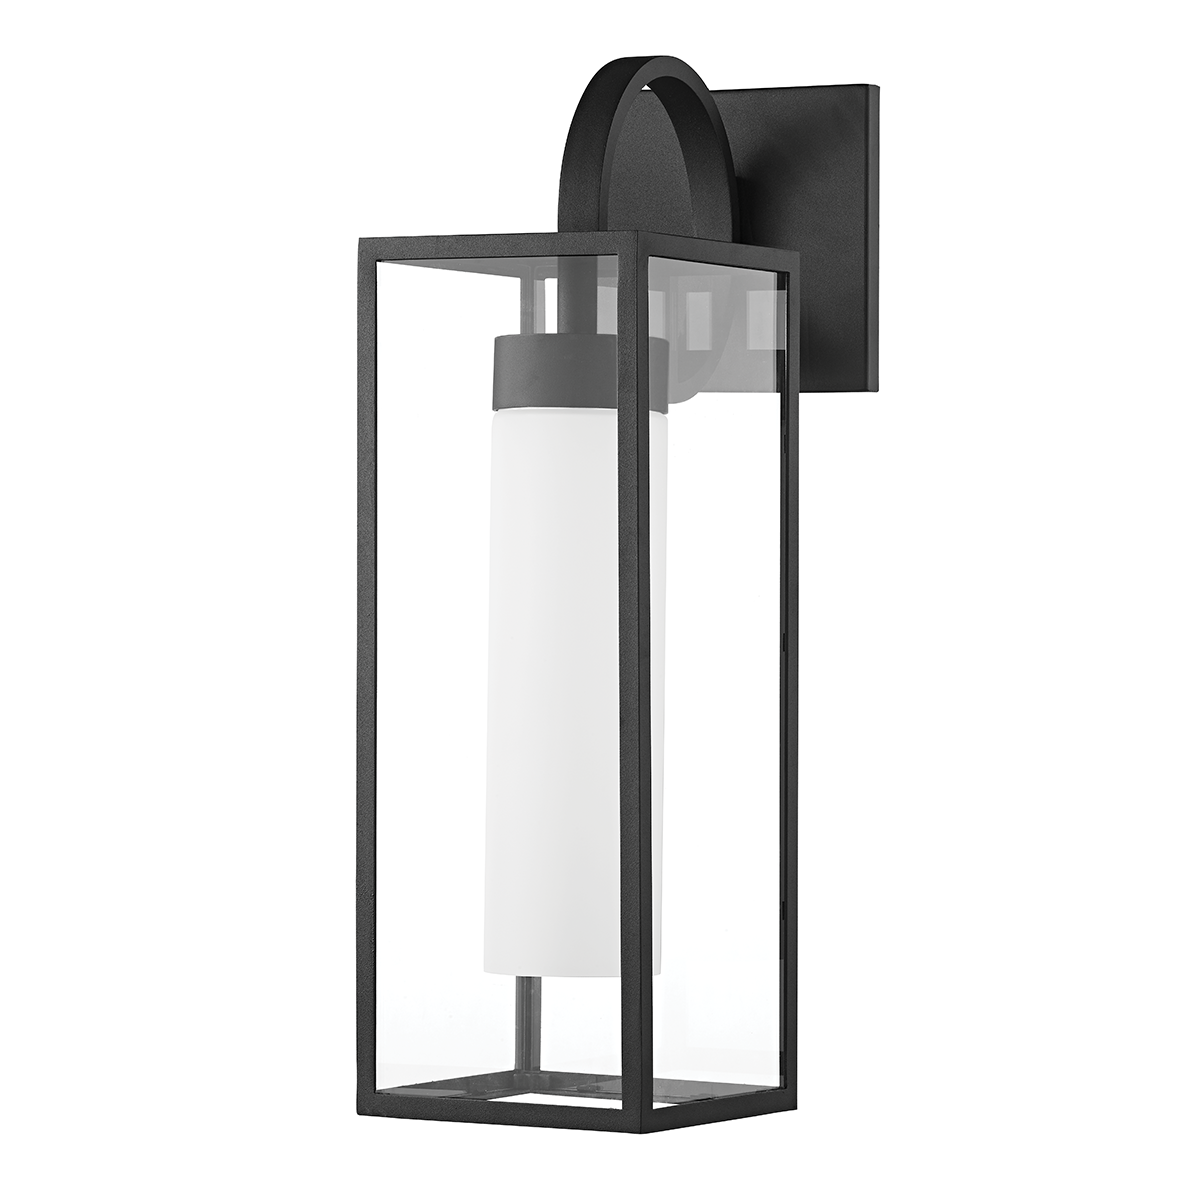 Troy PAX 1 LIGHT LARGE EXTERIOR WALL SCONCE B6913 Outdoor l Wall Troy Lighting TEXTURE BLACK  